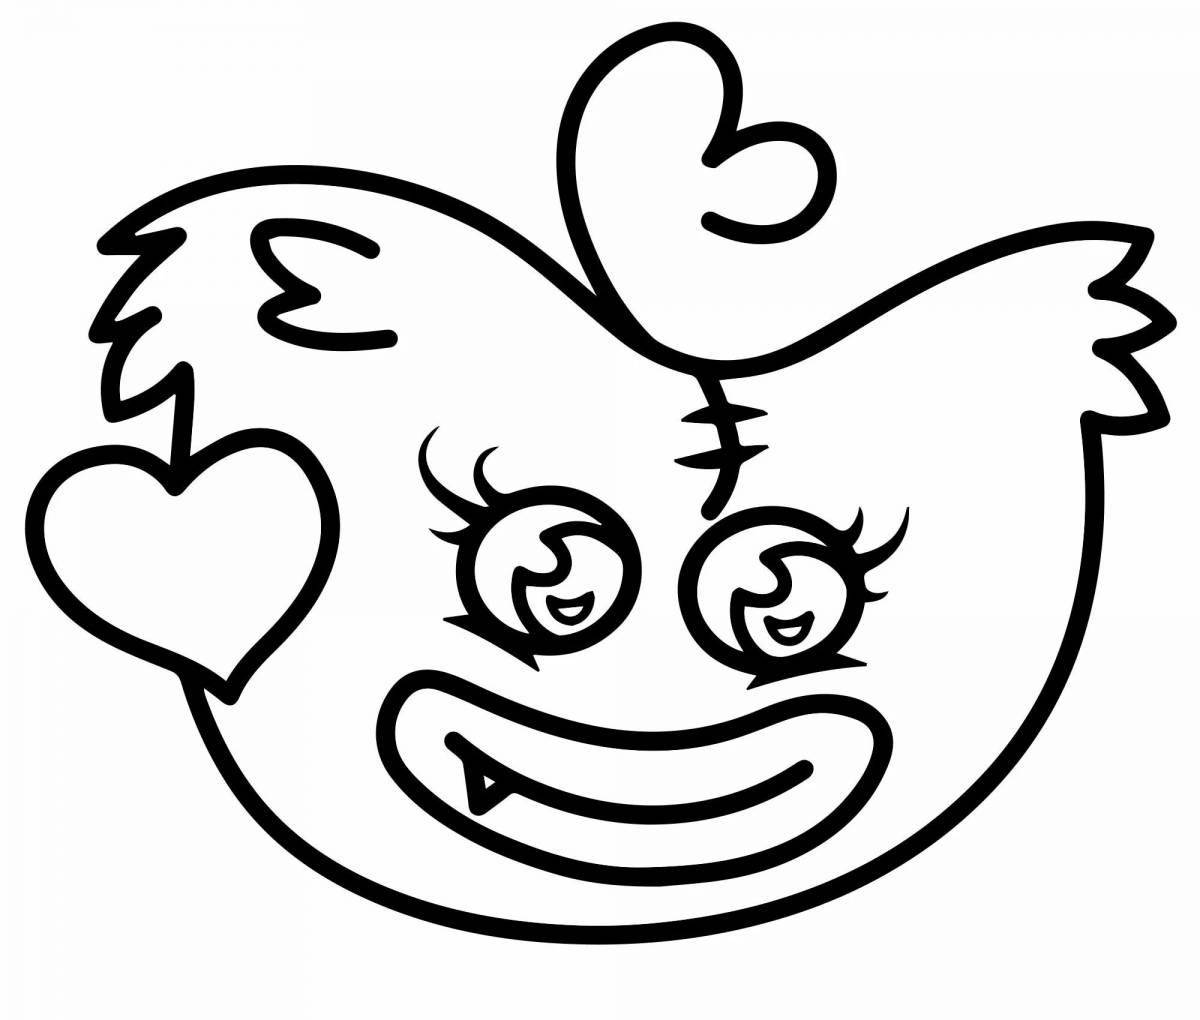 Huggy waggie live coloring page